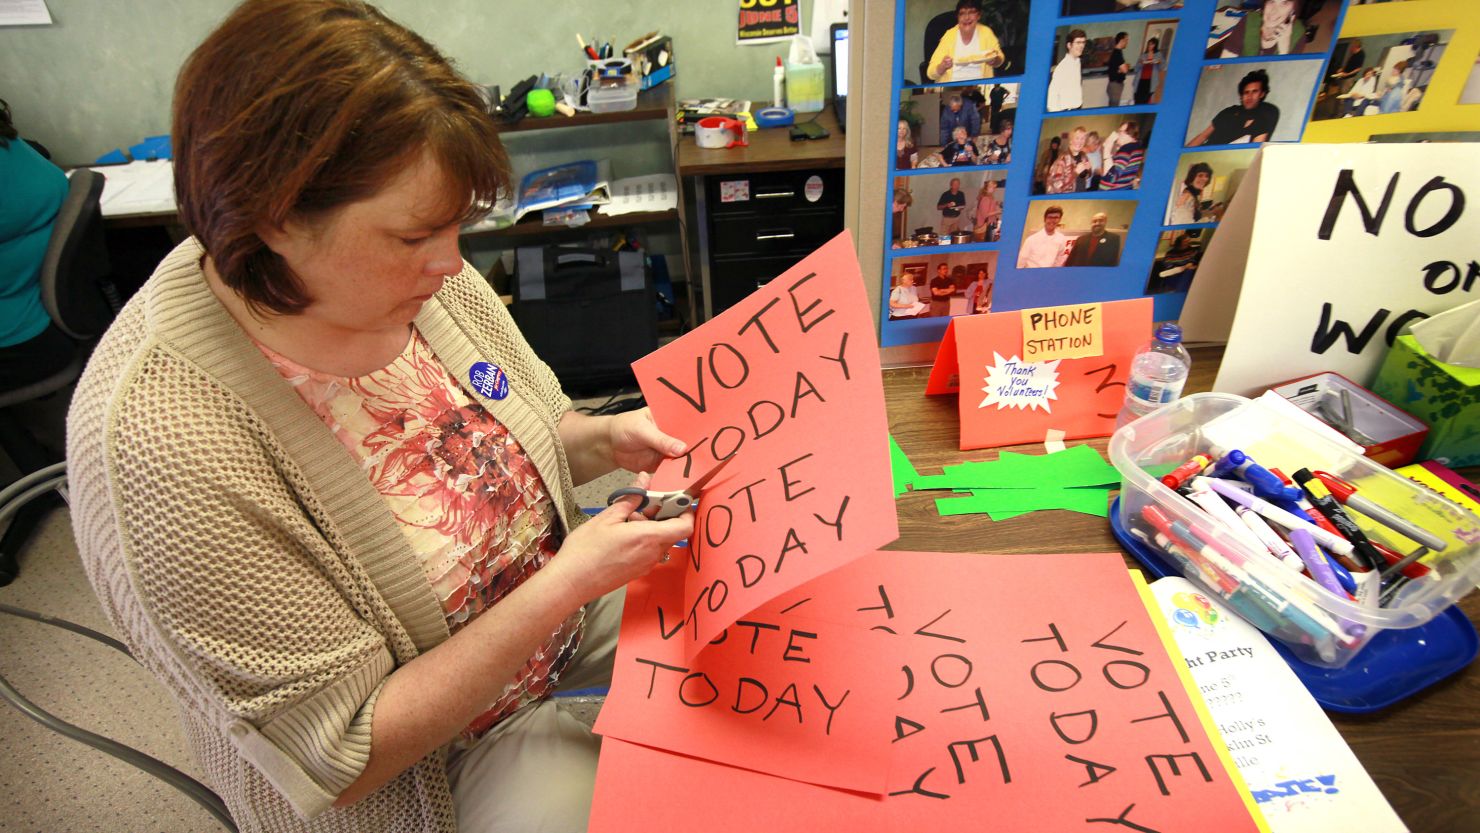 Kerry Southers prepares for the recall vote at the Democratic Party headquarters Monday in Janesville, Wisconsin.